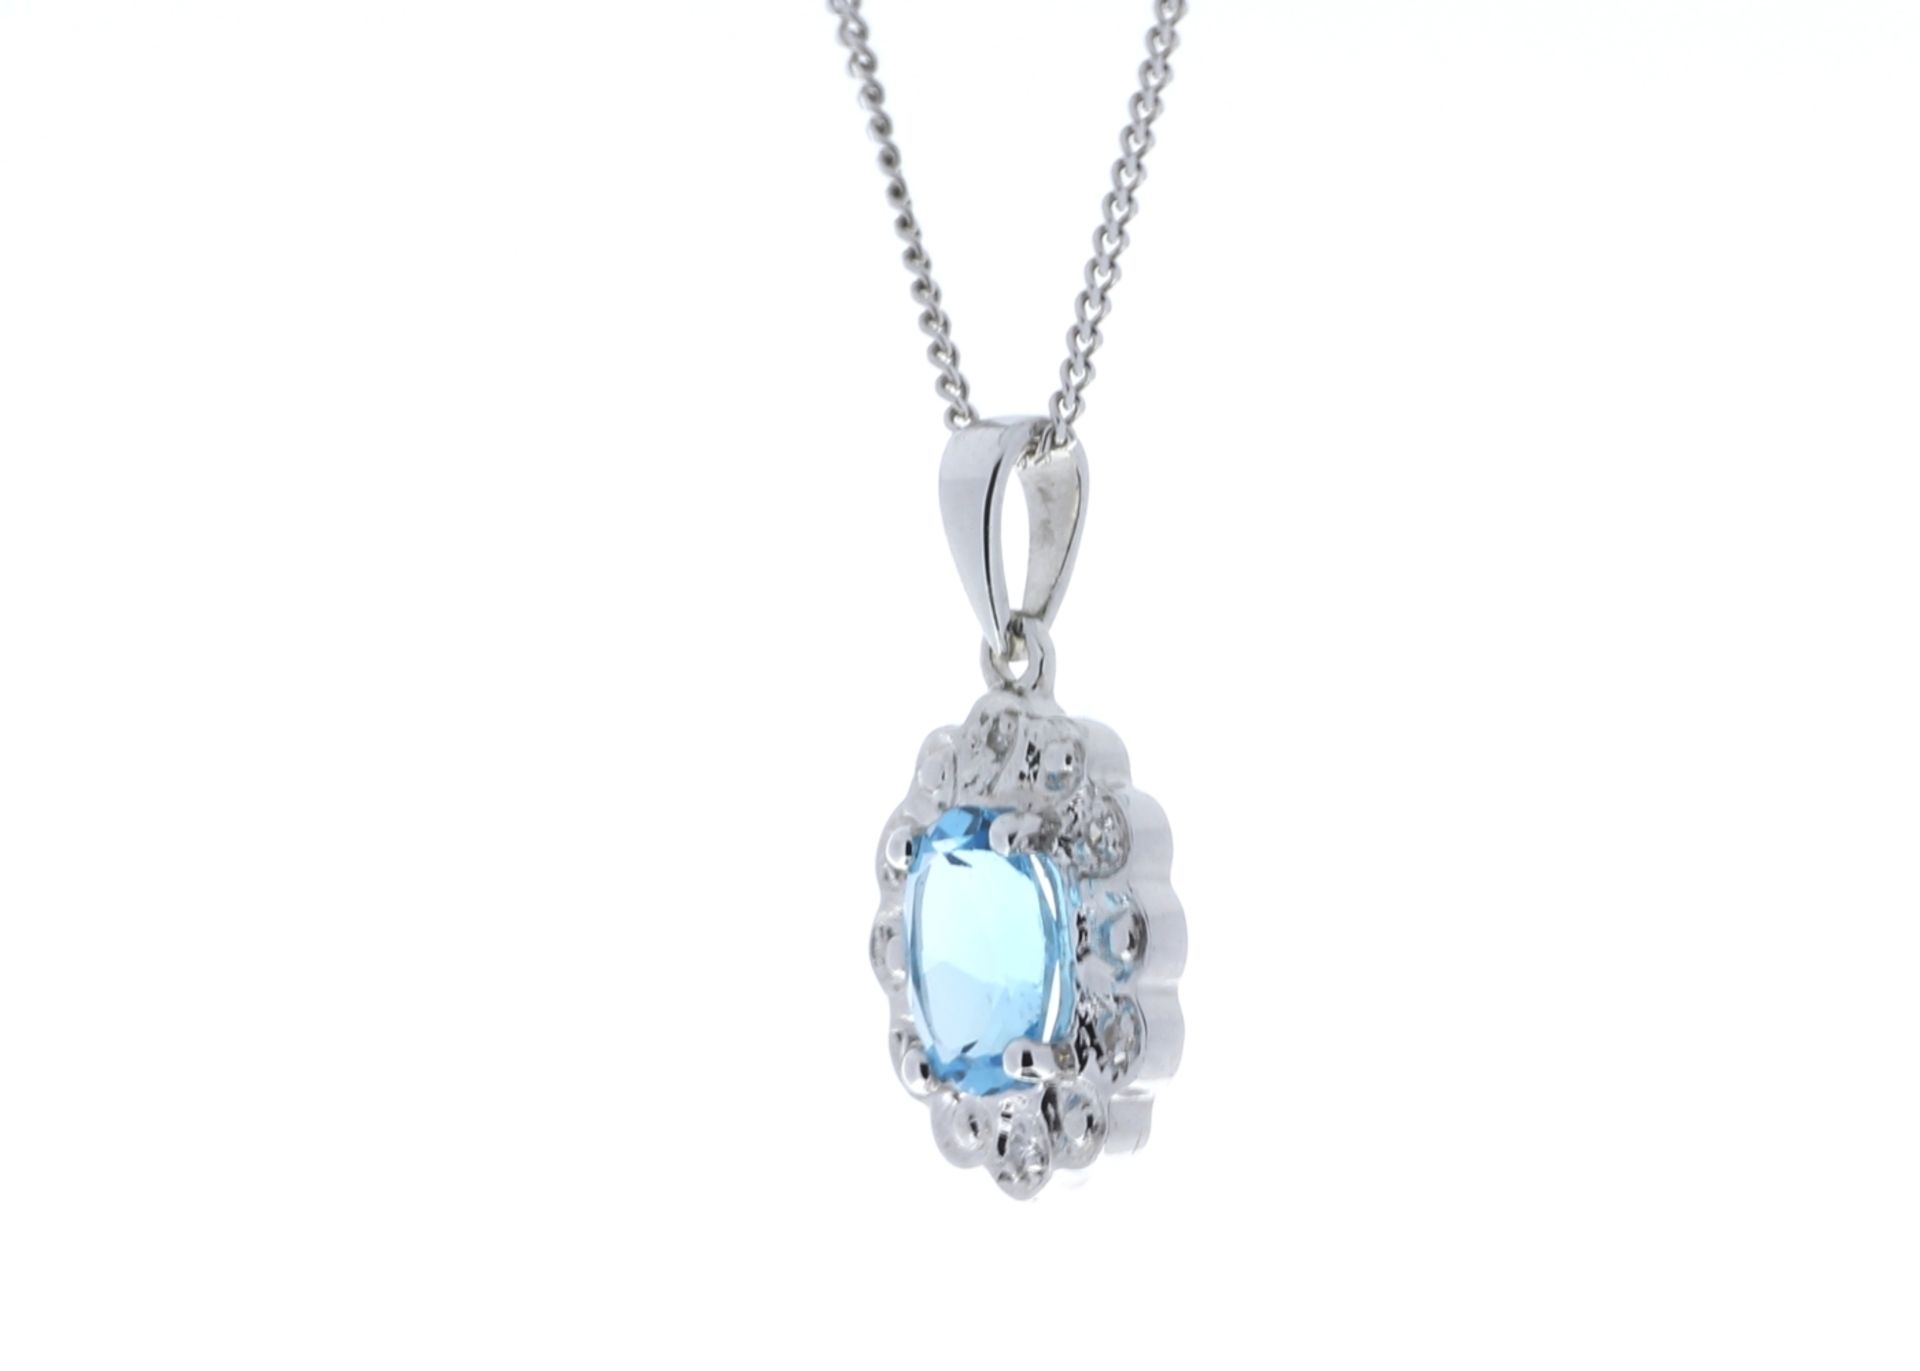 9ct White Gold Fancy Cluster Diamond Blue Topaz Pendant 0.02 Carats - Valued by AGI £259.00 - 9ct - Image 4 of 5